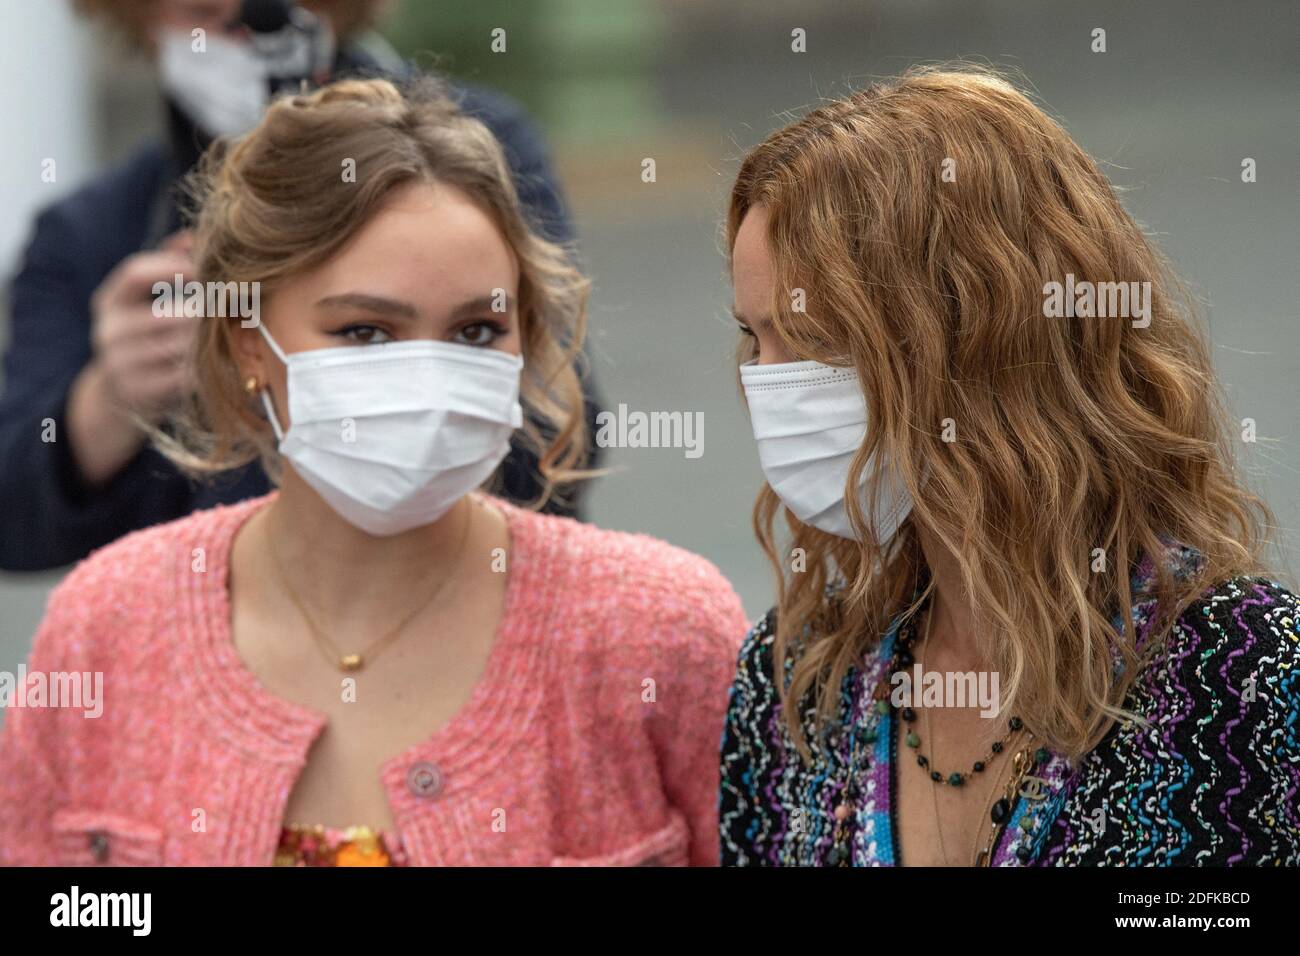 Vanessa paradis and her daughter hi-res stock photography and